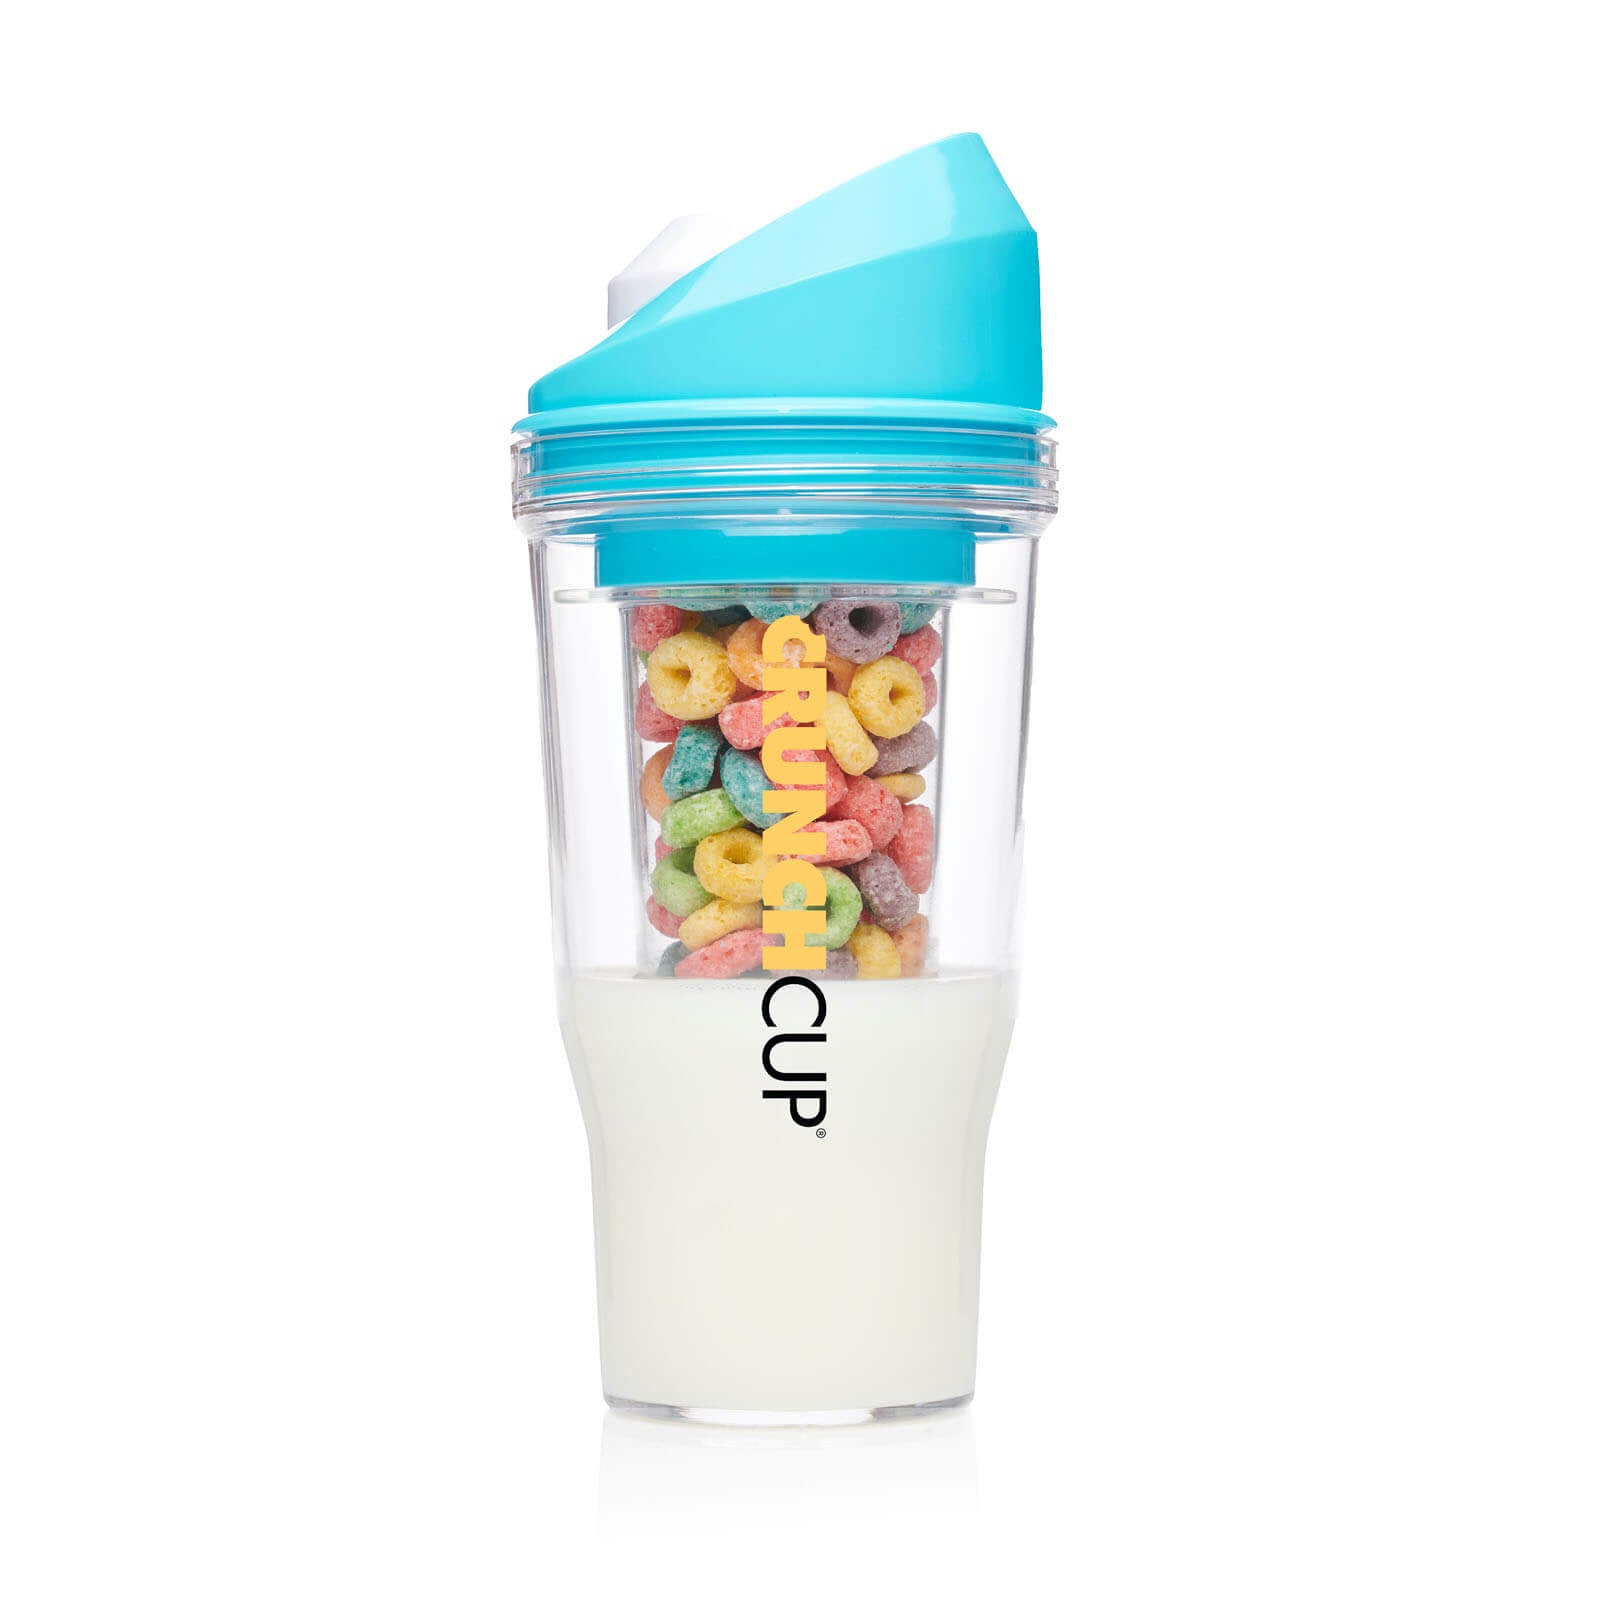 Doolland Cereal and Milk Container ，Portable Cereal Cup Double Layer Hiking  Cereal Bowl Separate Milk Snack Cup，Camping And RV Food Preservation 